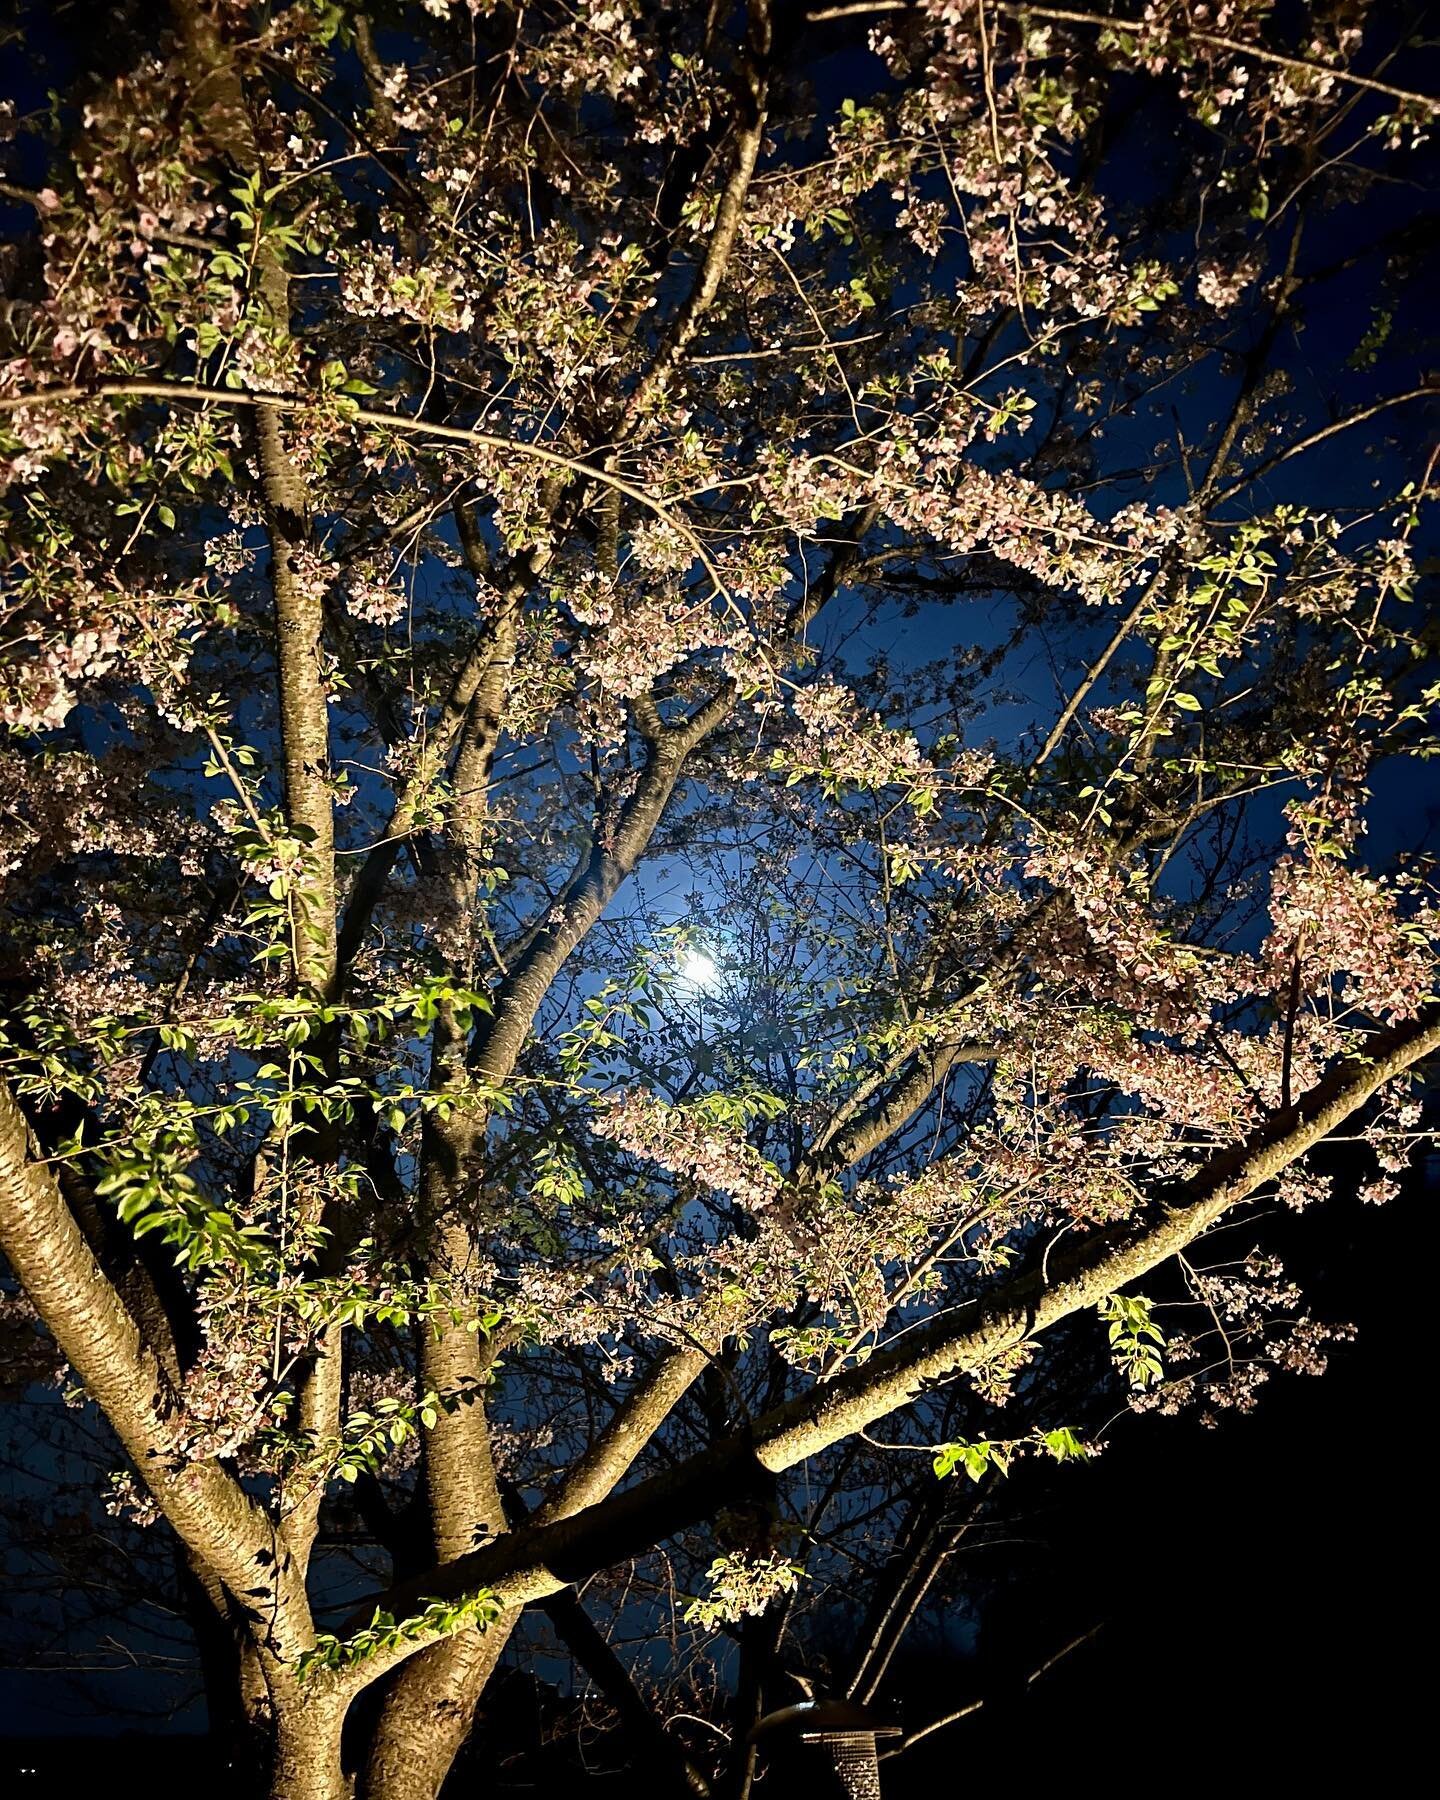 Last nights moon with the cherry blossoms was a vibe 🌸🌝

#iphonephotography #iphone13 #whenthemoonhitsyourtree #cherryblossoms #nighttimephotography #fullmoonrising